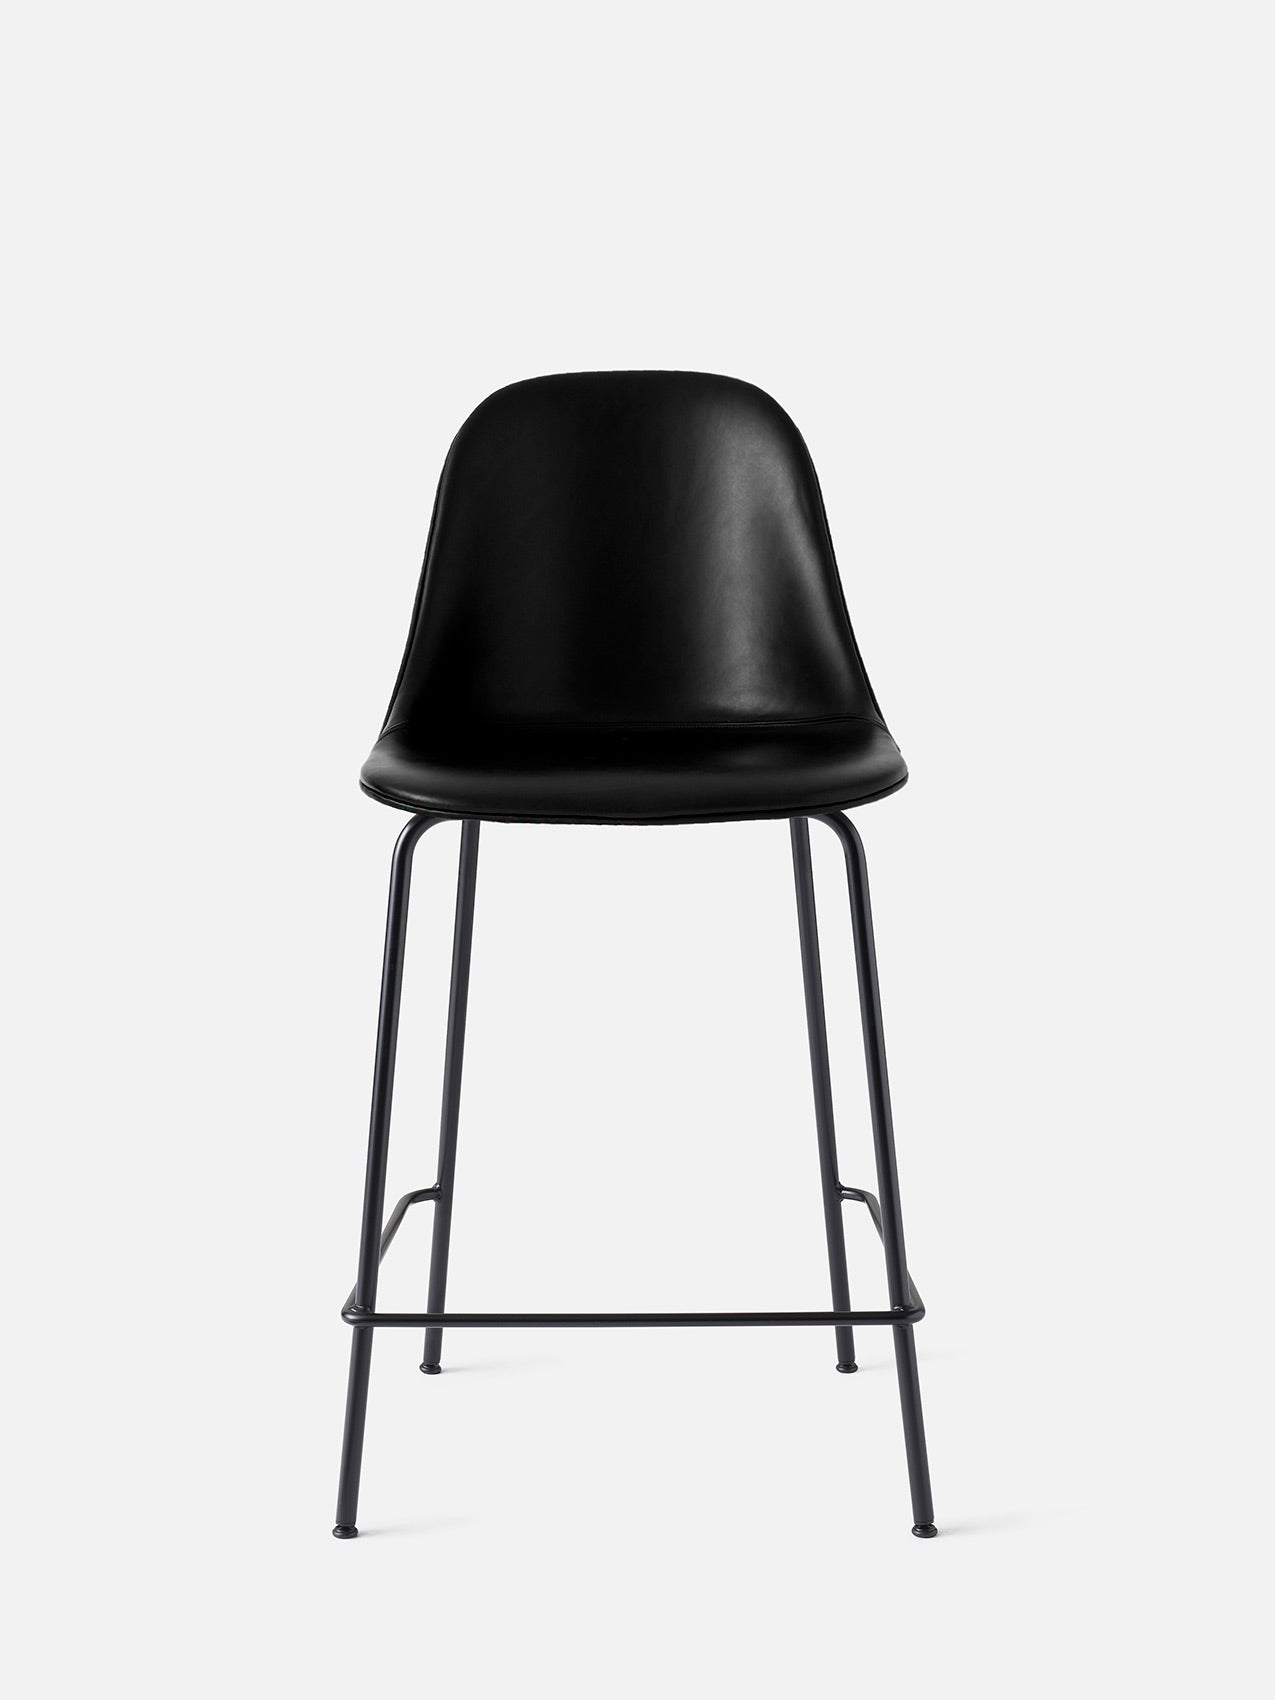 Harbour Side Chair, Upholstered-Chair-Norm Architects-Counter Height (Seat 24.8in H)/Black Steel-0842 Black/Dakar-menu-minimalist-modern-danish-design-home-decor